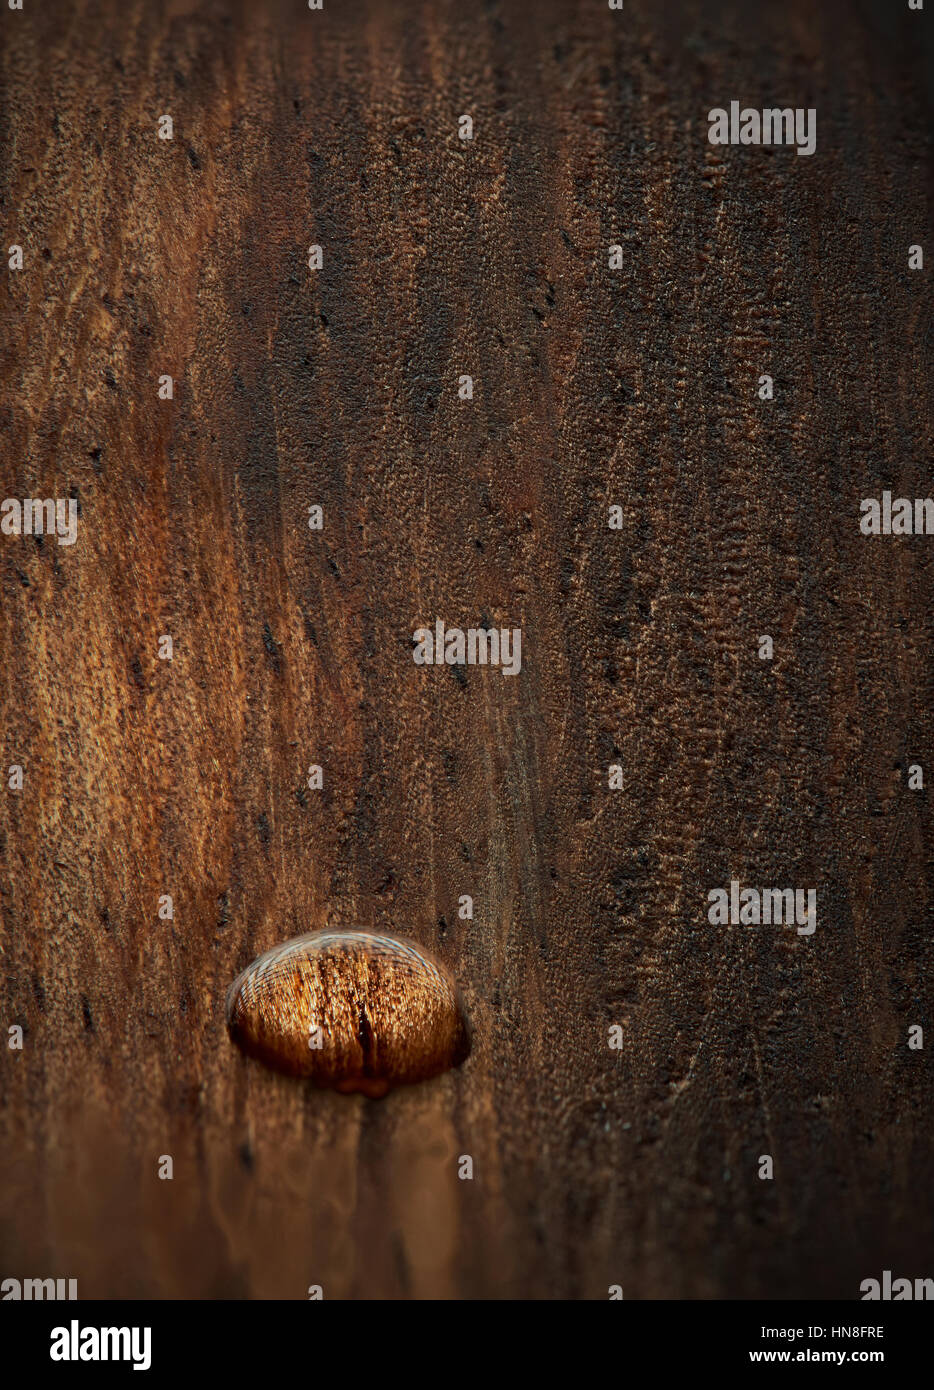 close up of brown wood surface with water drop Stock Photo